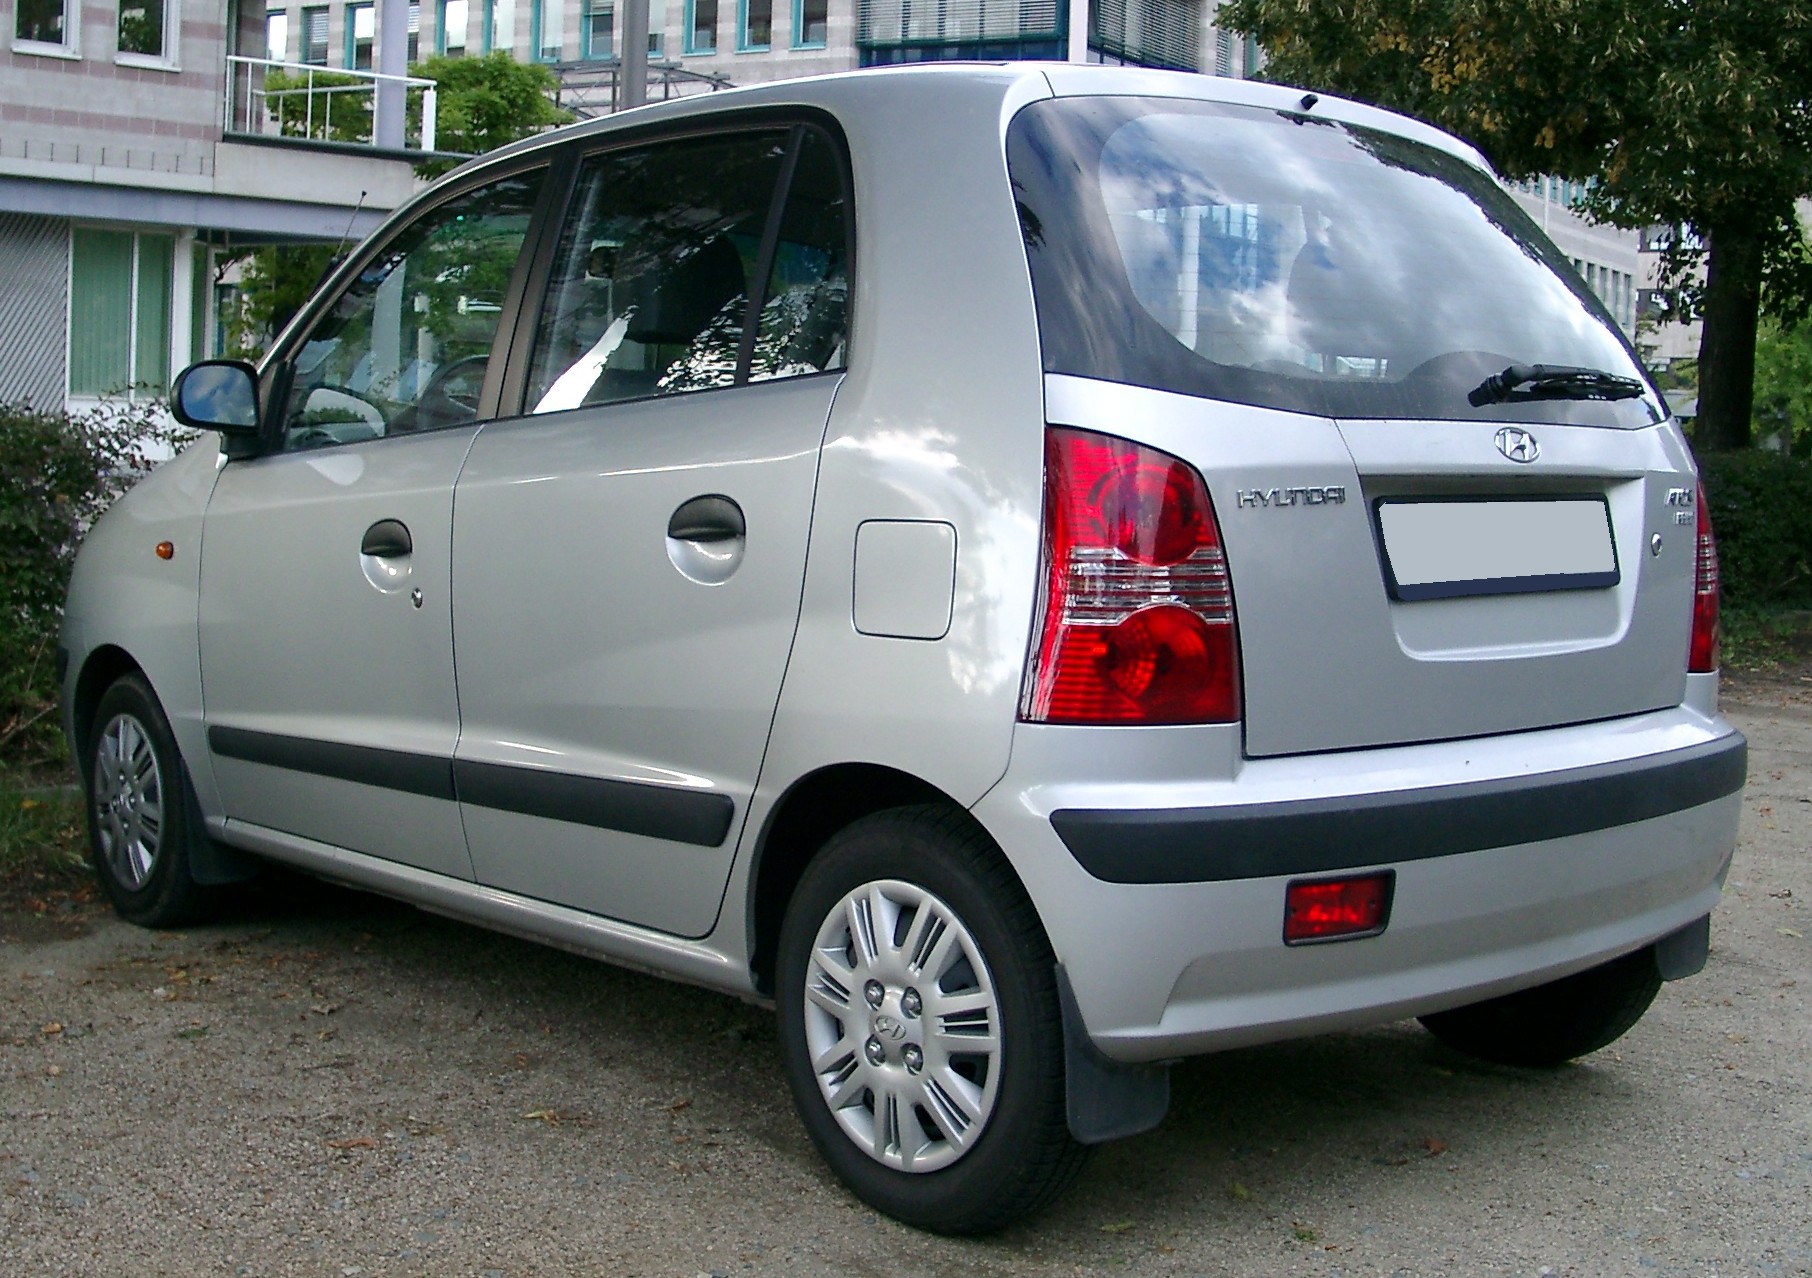 Hyundai Atos 2010 Review, Amazing Pictures and Images